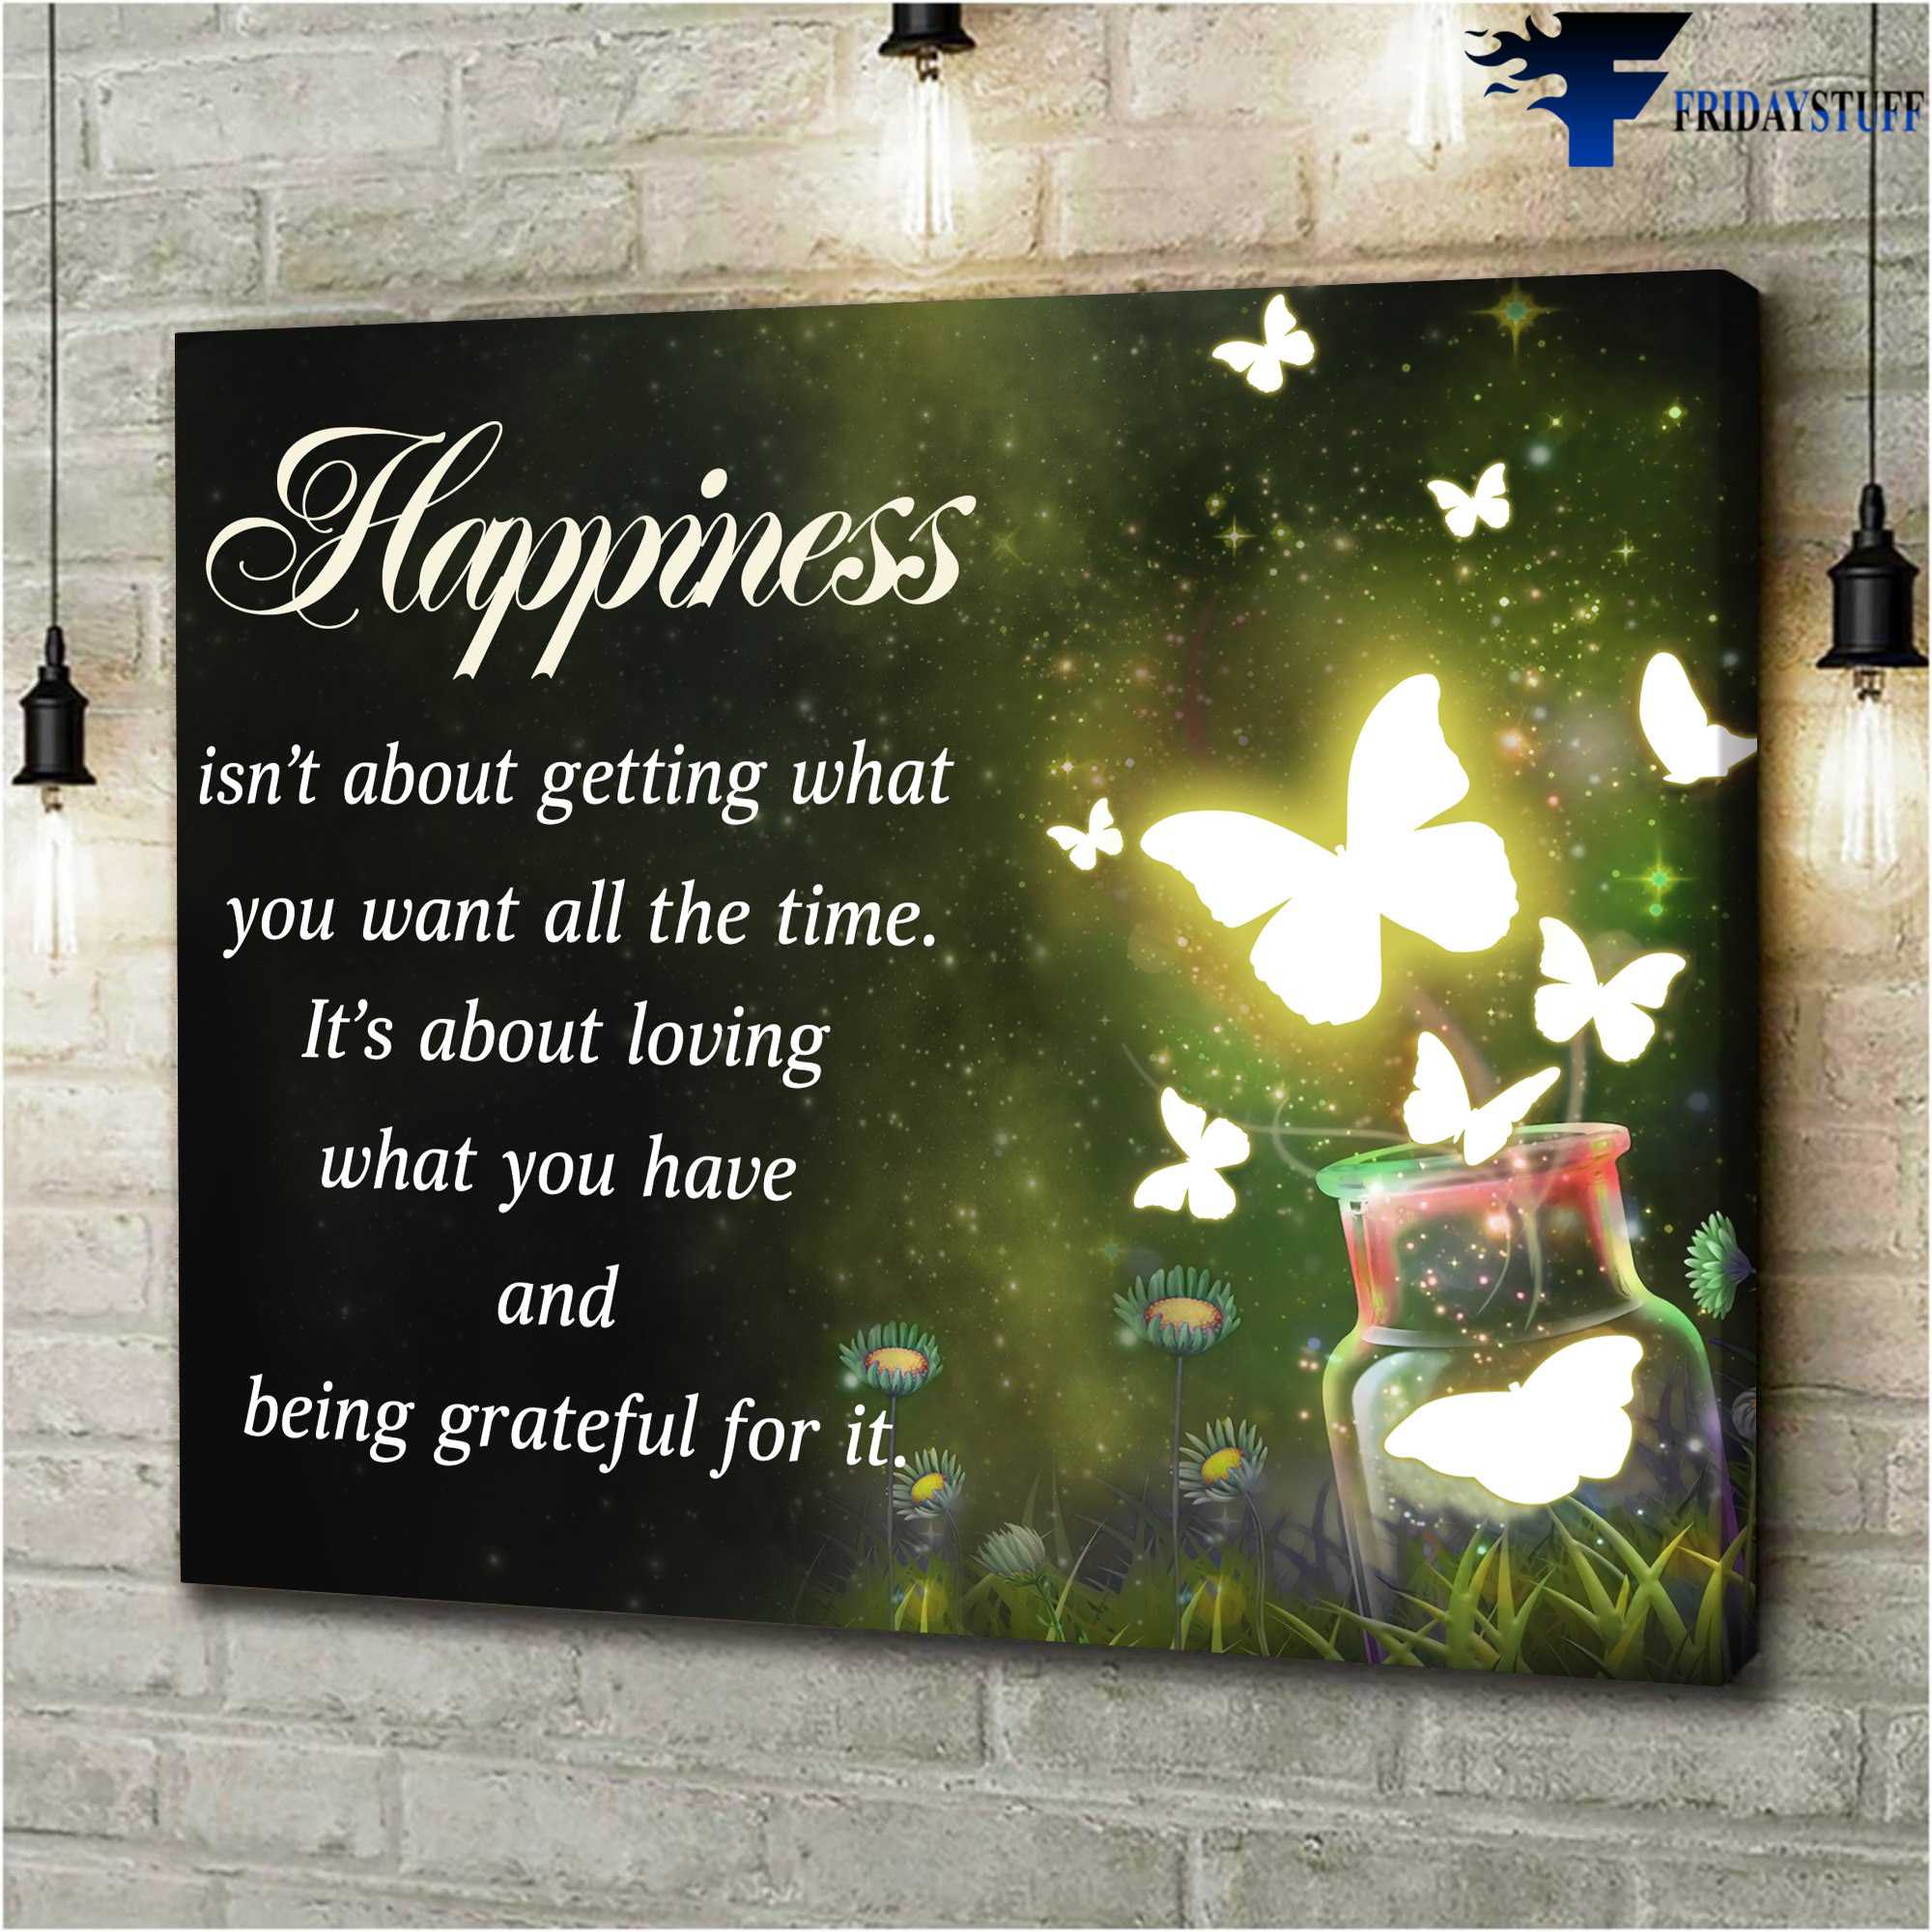 Butterfly Poster - Happiness Isn't About Getting What, You Want All The Time, It's About Loving What You Have, And Being Grateful For It